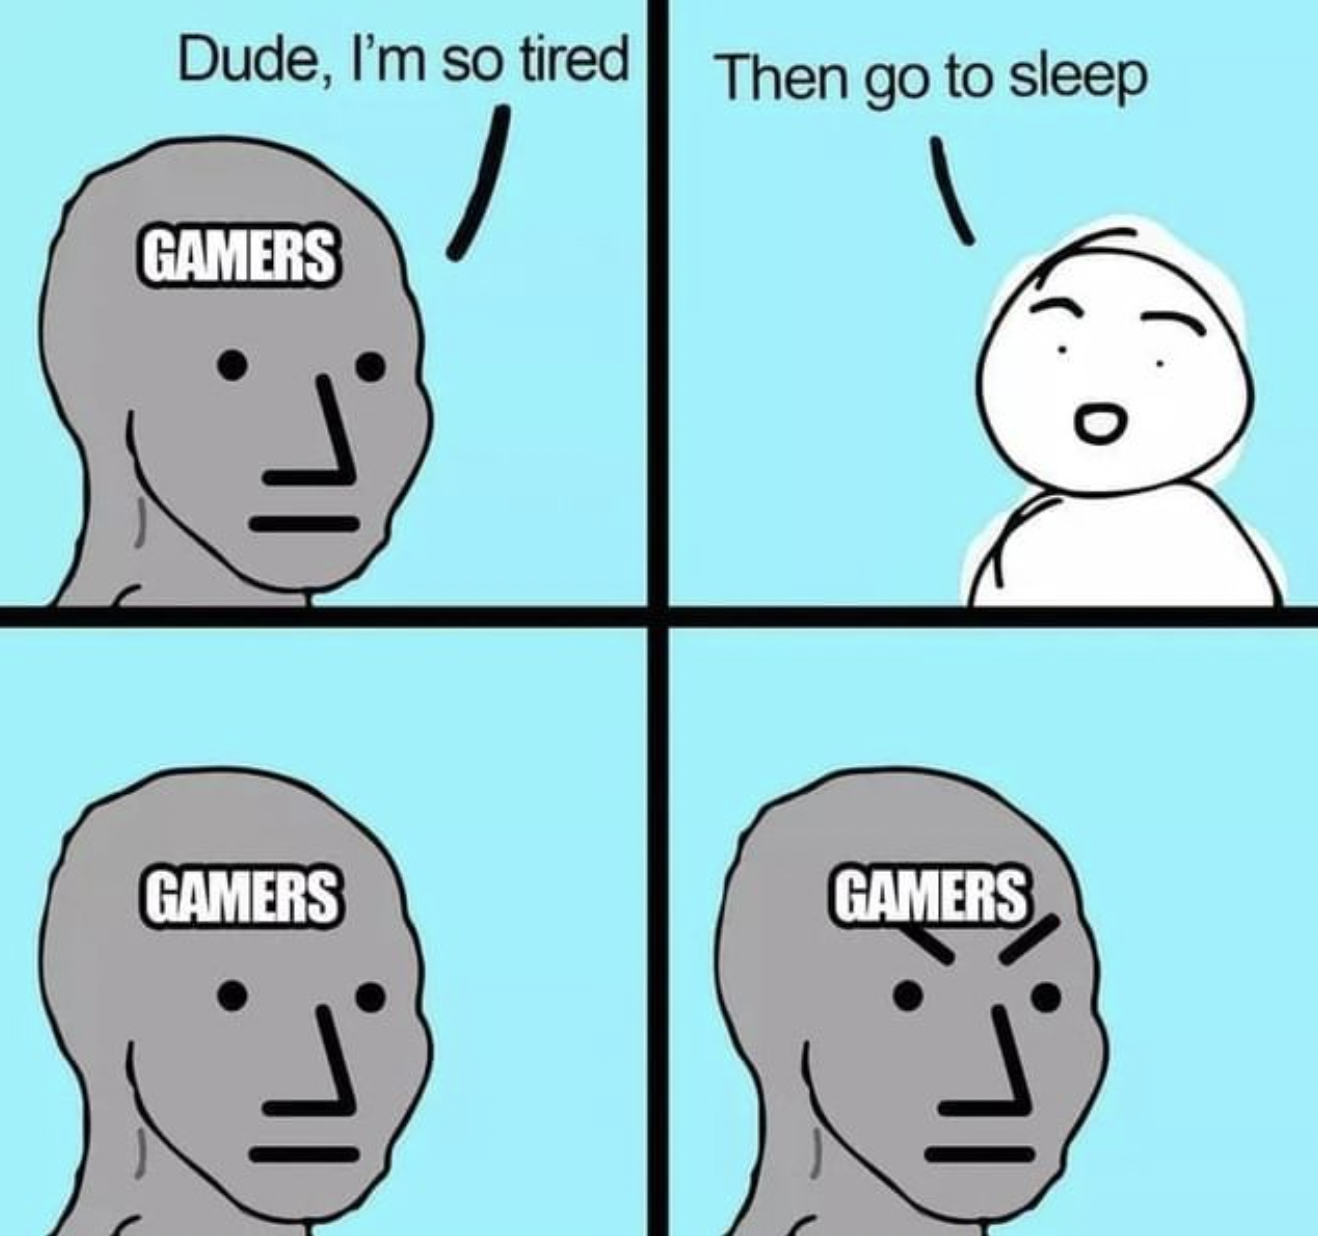 Gaming memes - i m not doing well meme - Dude, I'm so tired Then go to sleep 1 Gamers Gamers Gamers